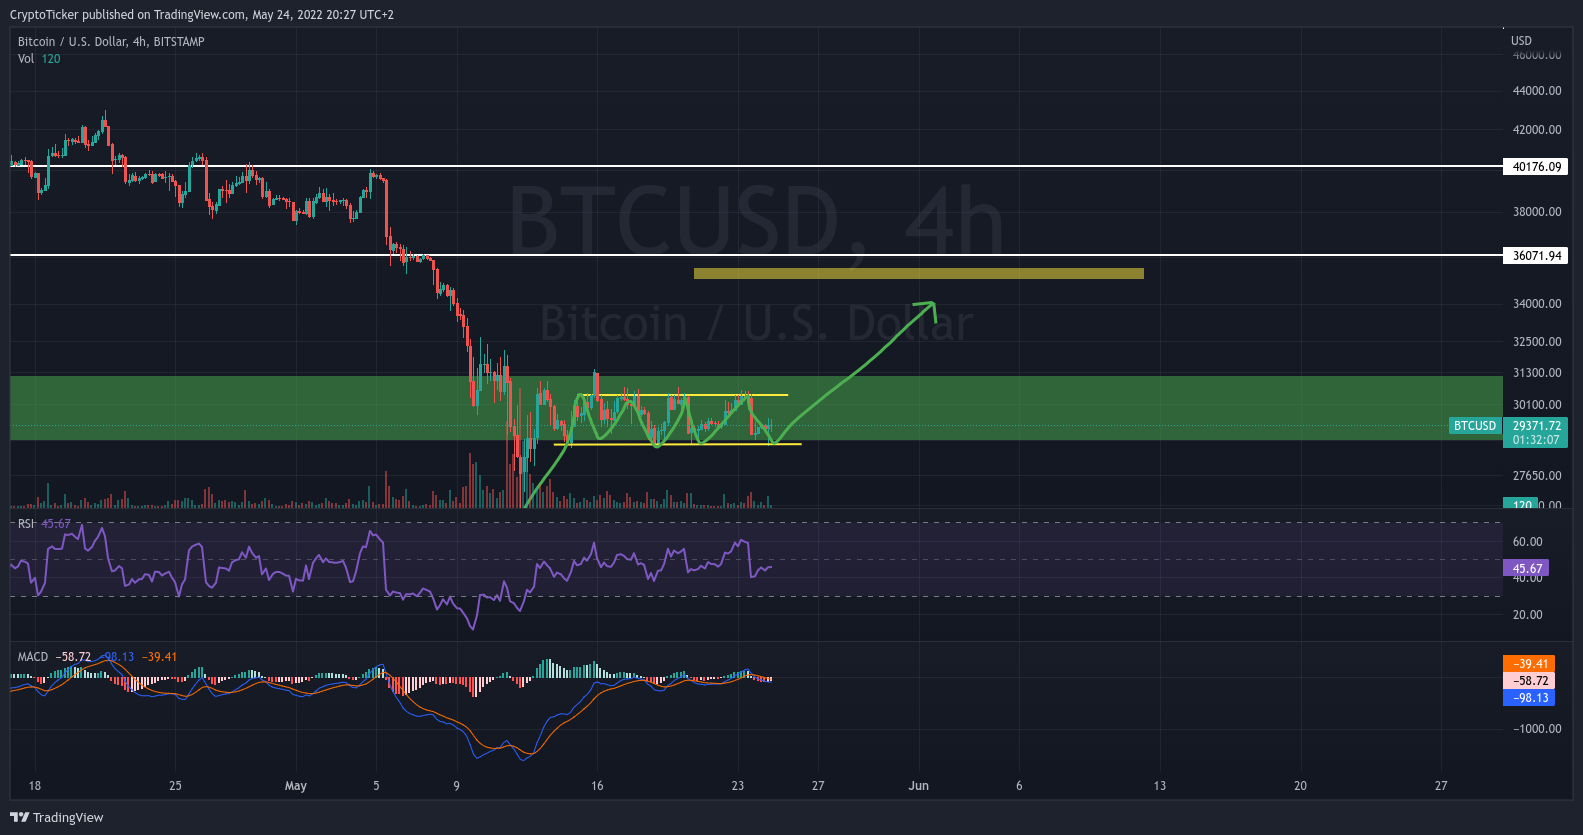 BTC/USD 4-hours chart showing the target areas of BTC